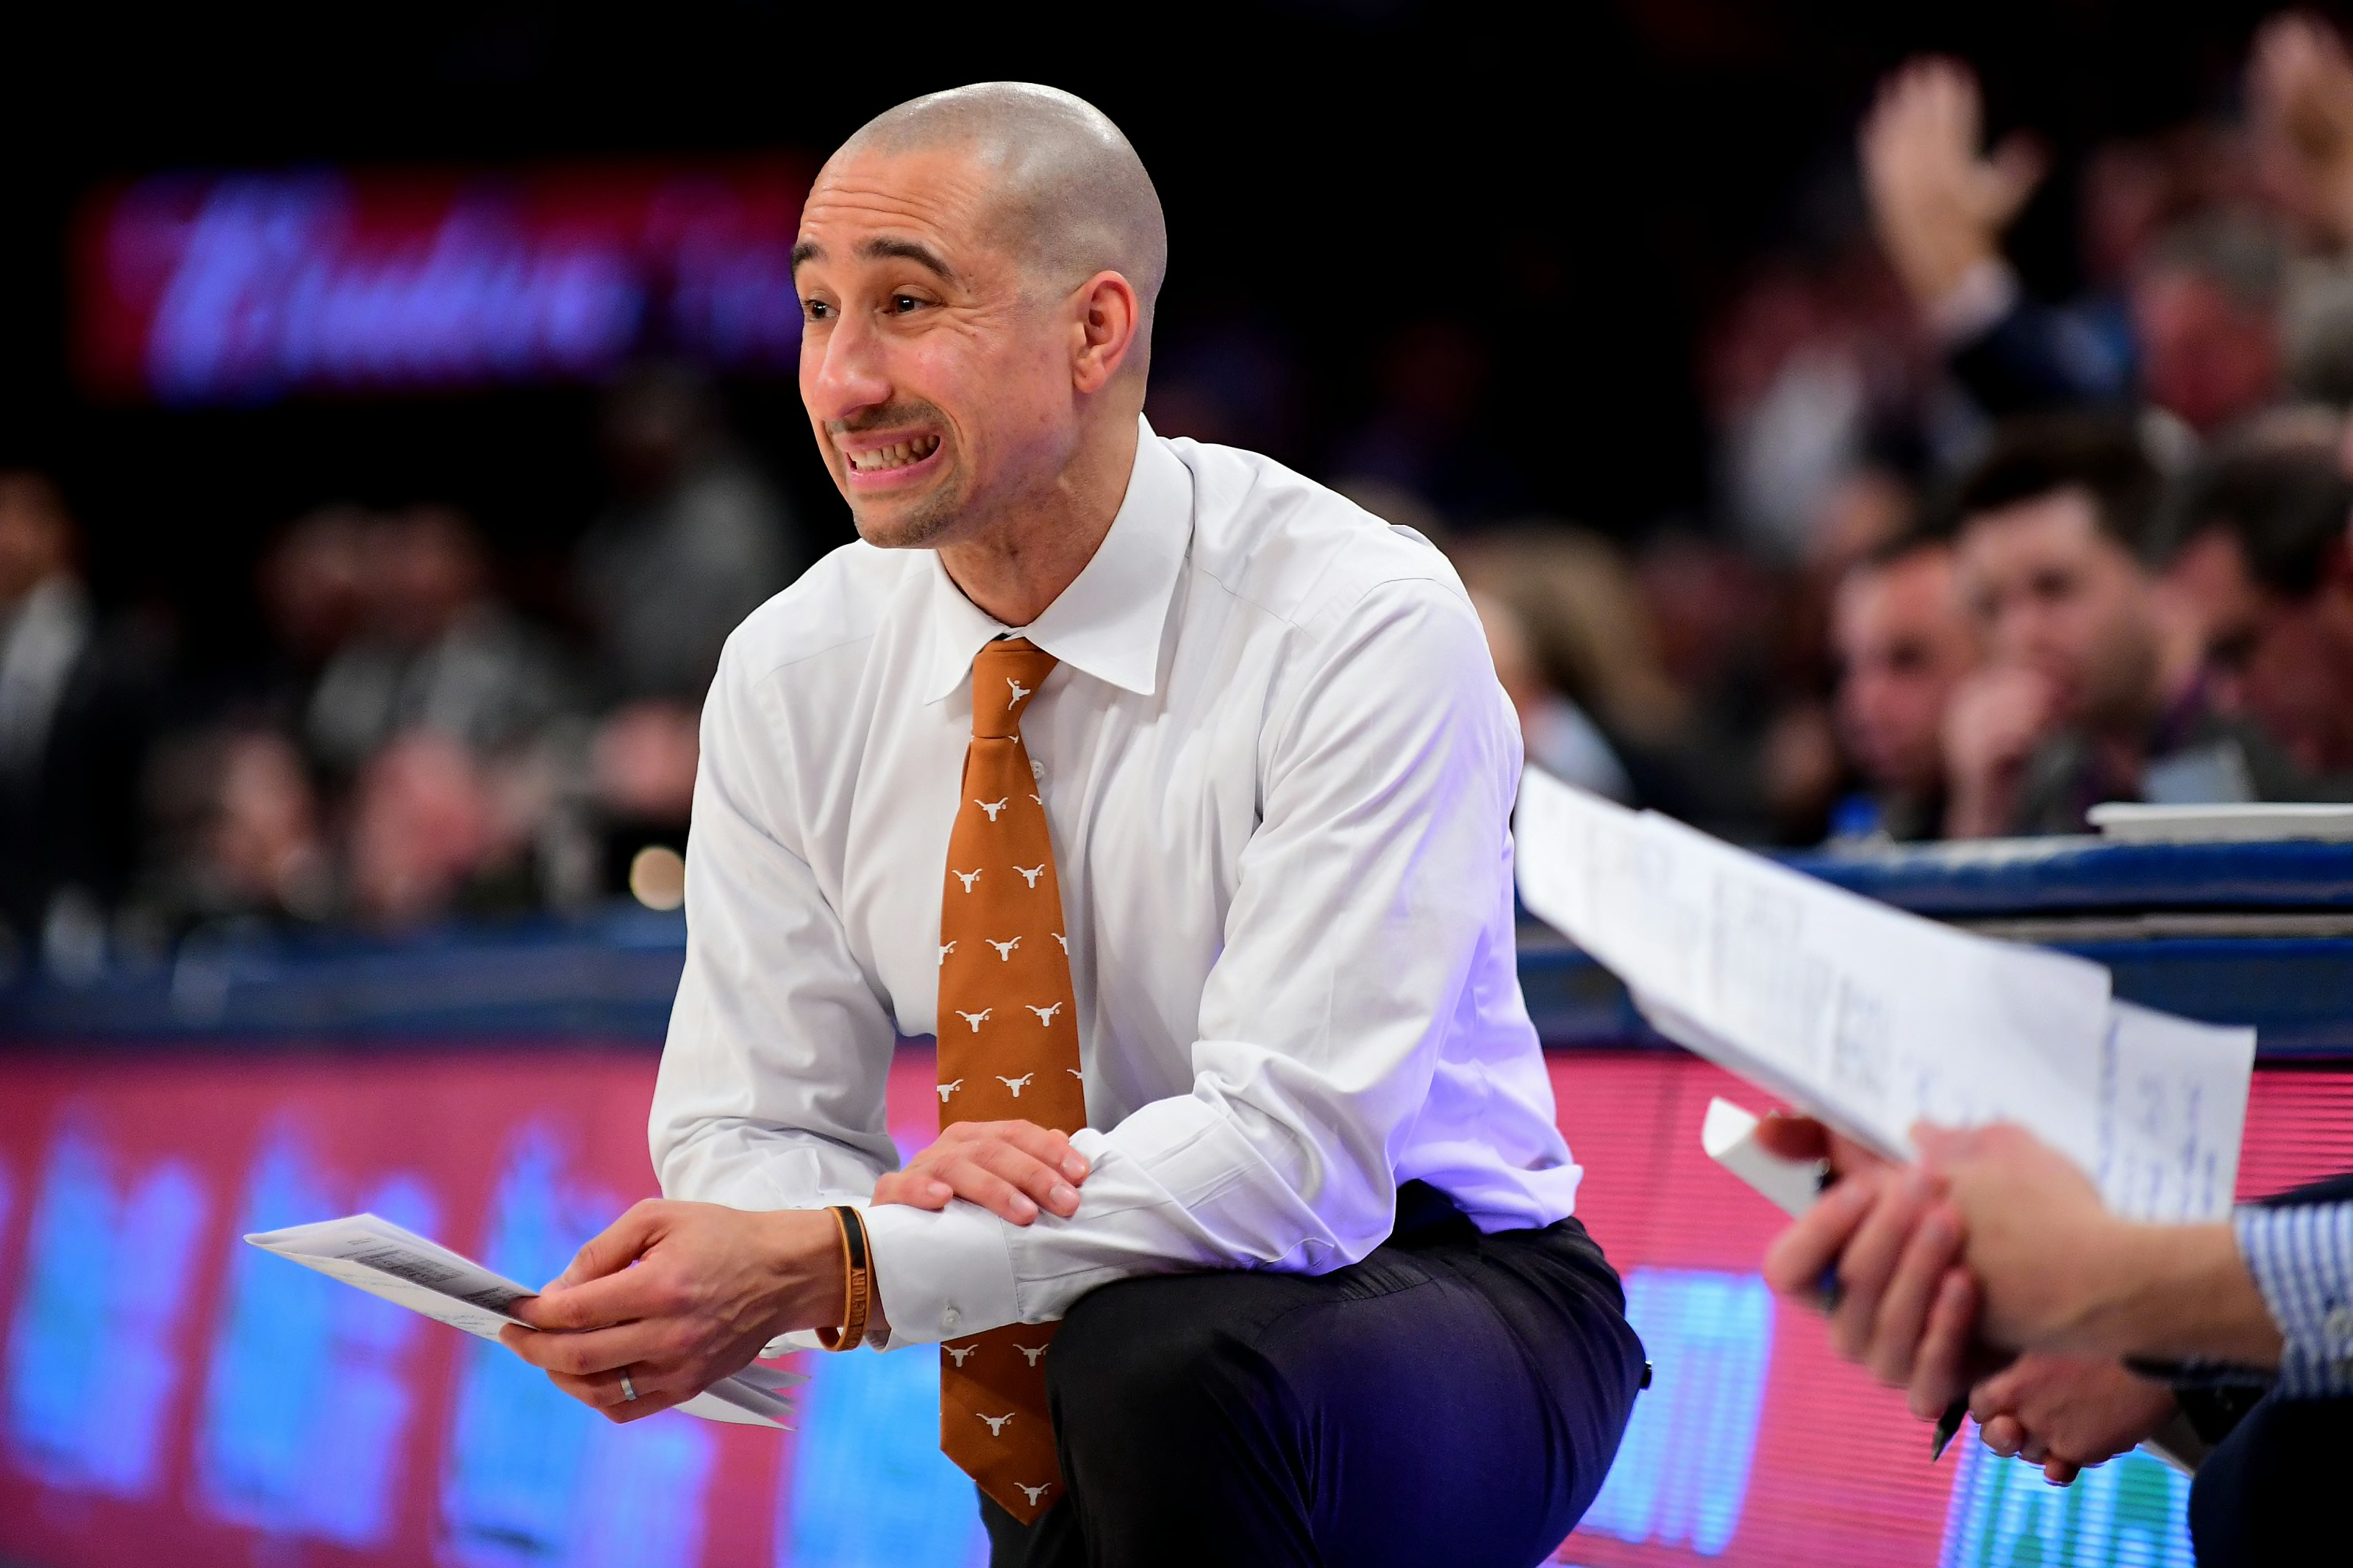 Texas Basketball: 5 potential replacements for Shaka Smart as head coach